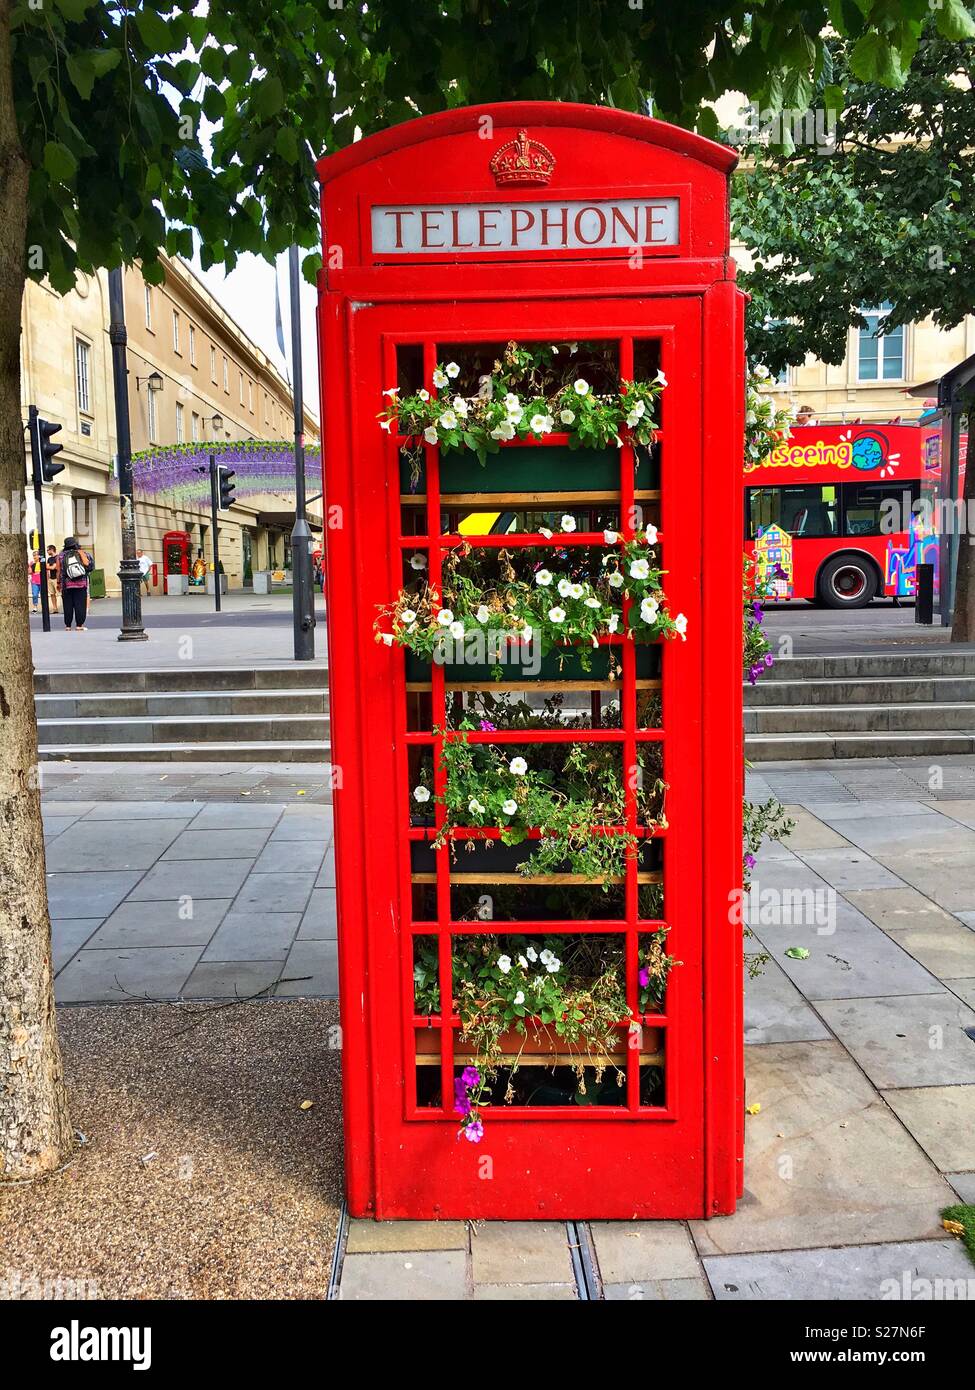 A former public telephone call box is repurposed to display flowers in Bath, England UK Stock Photo